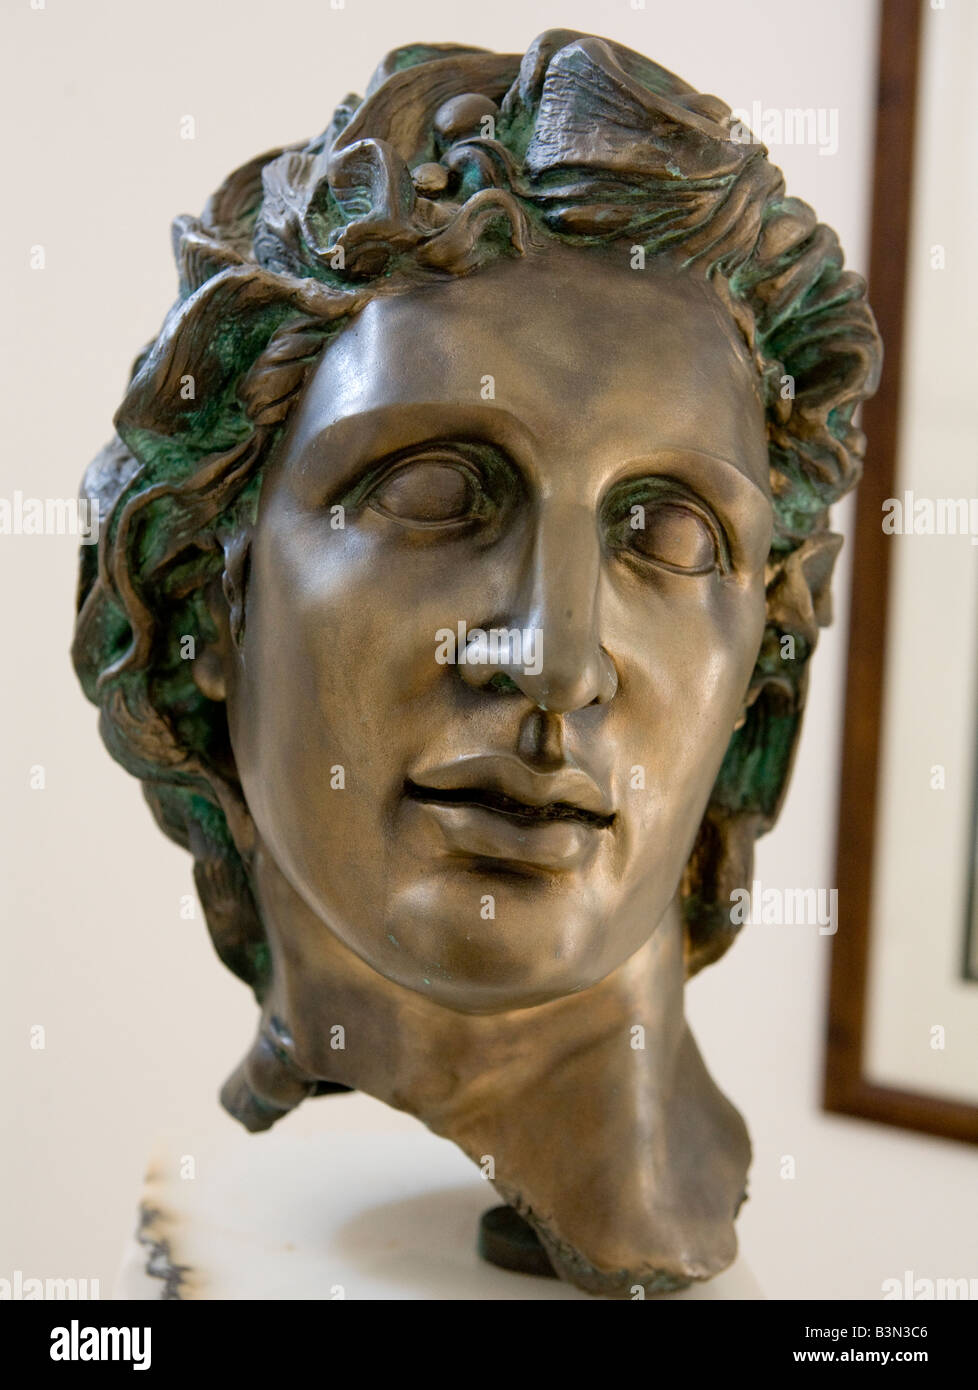 Marble head of Alexander The Great, Kalithea Art Gallery, Rhodes, Greece Stock Photo